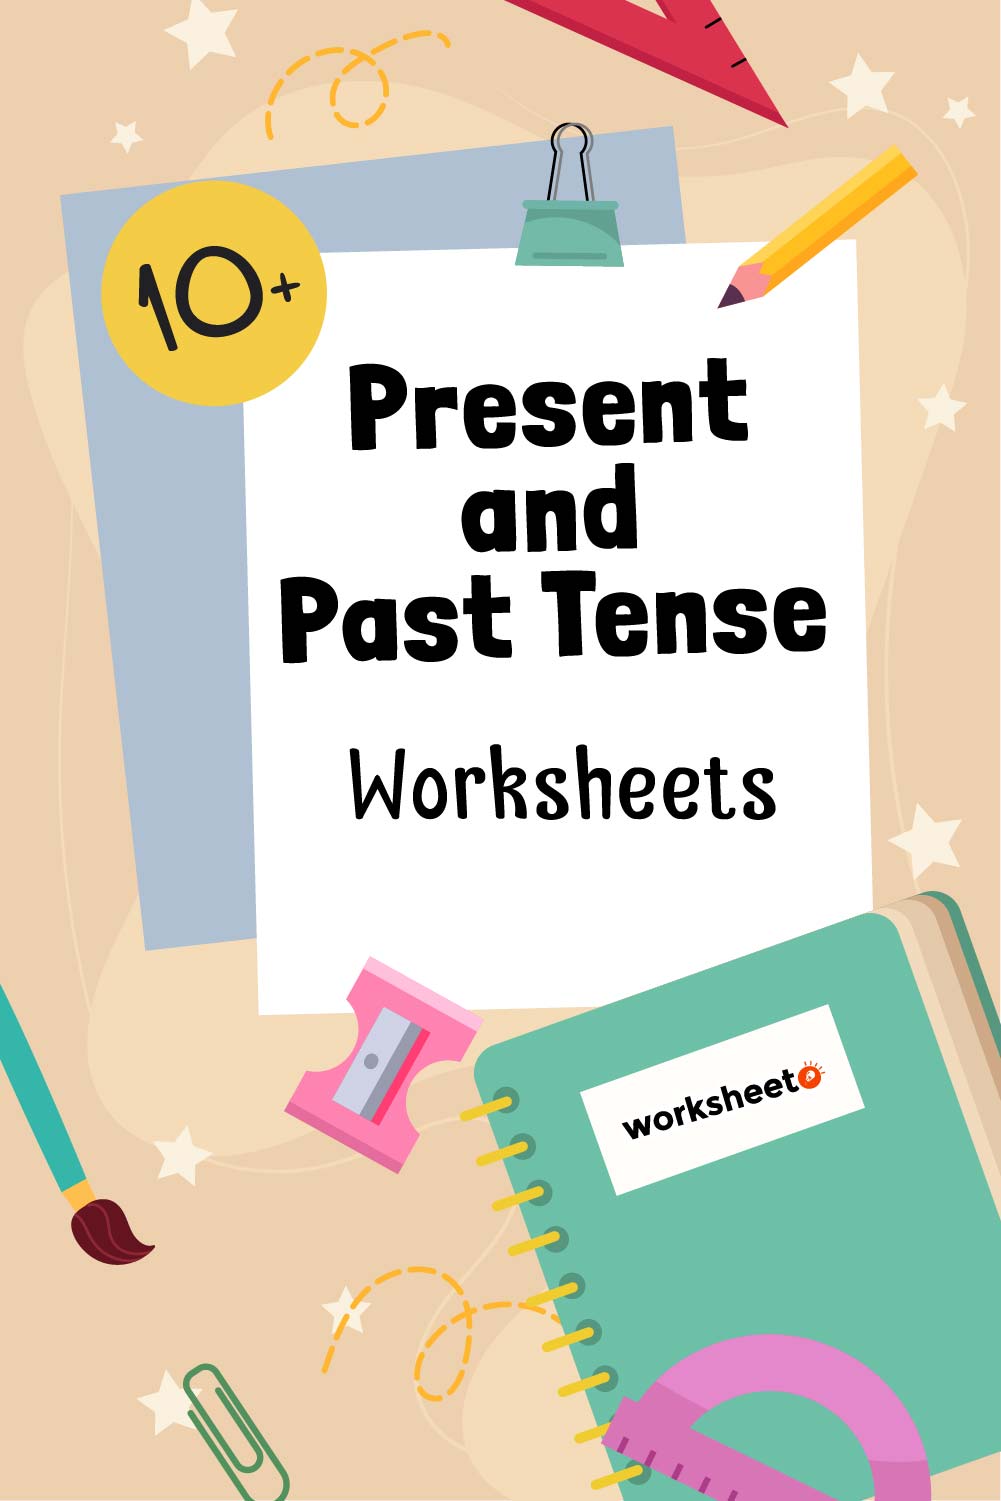 Present and Past Tense Worksheets